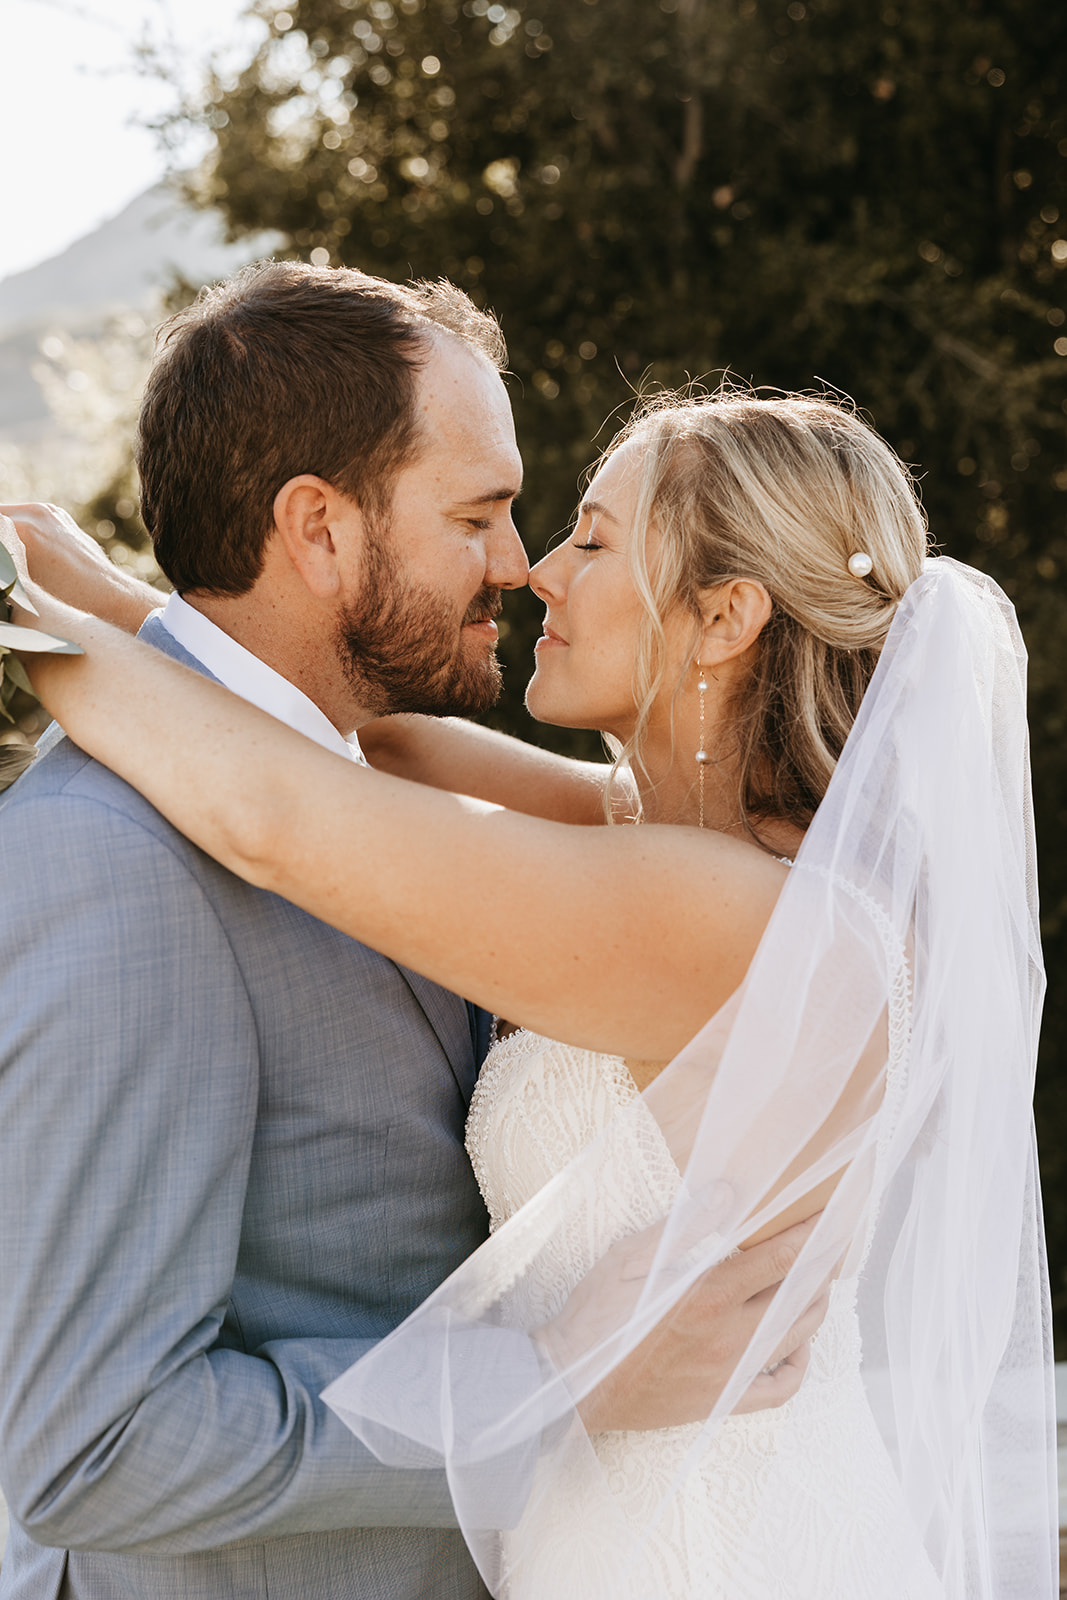 bride and groom kissing | The Penny: A Downtown Wedding Venue in San Luis Obispo